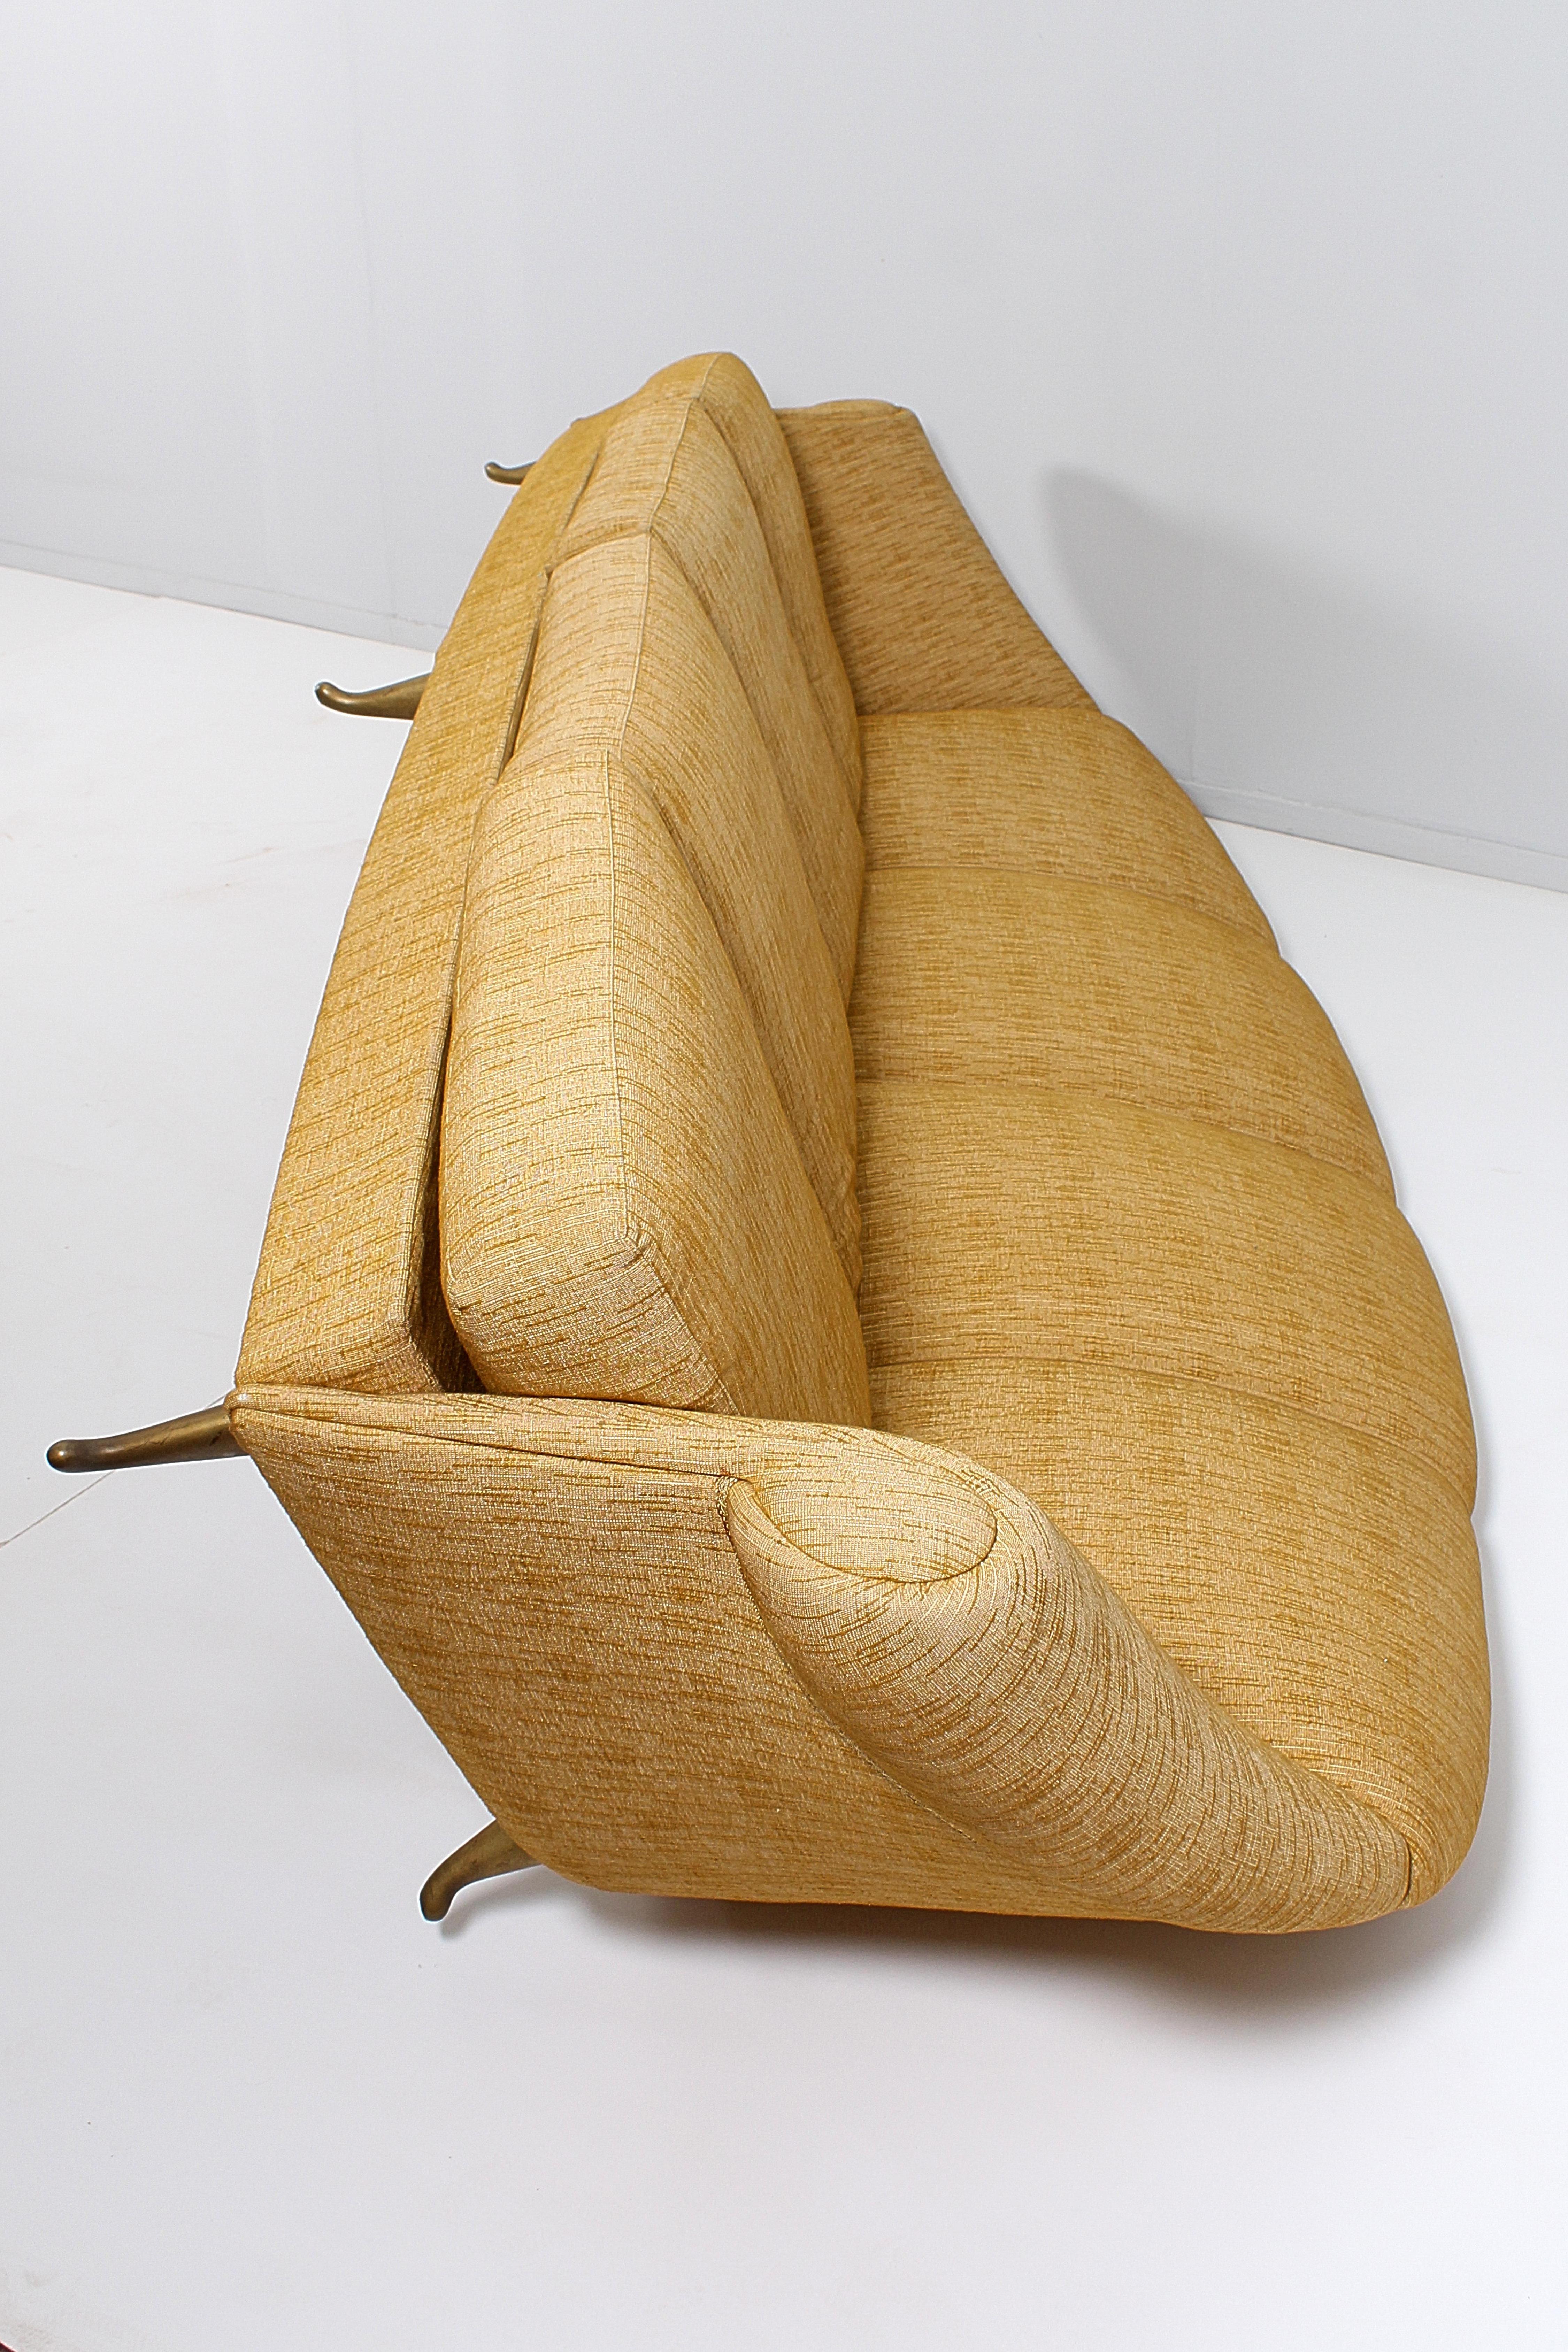 Giò Ponti (attr) for ISA Bergamo Wood and Fabric Four-Seat Sofa, Italy, 1950s For Sale 8